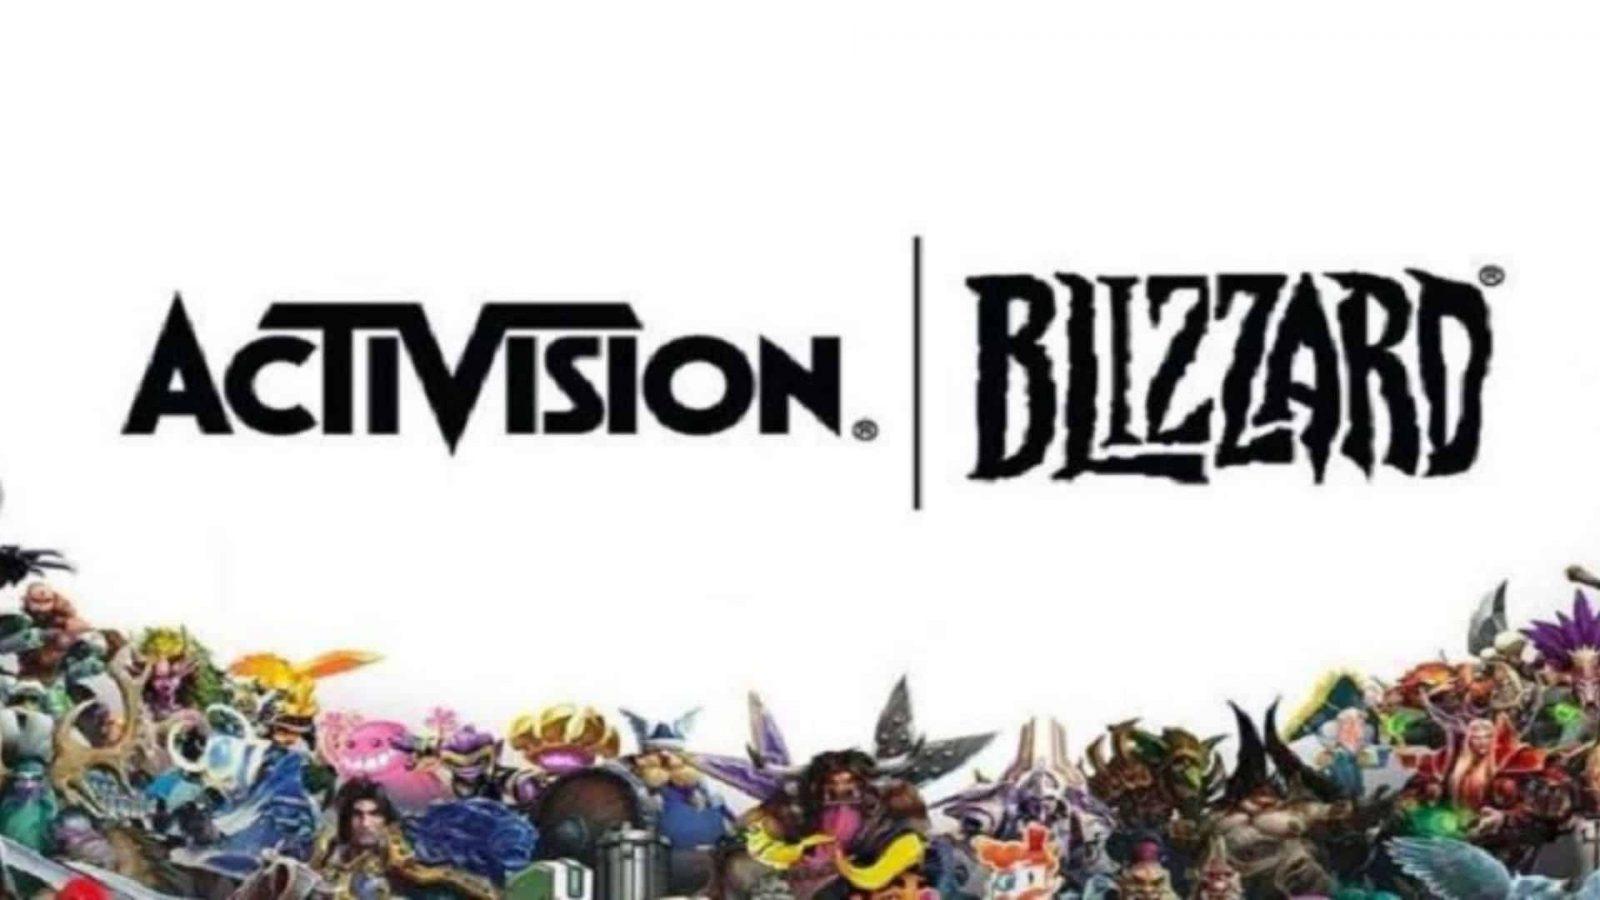 Activision Blizzard logos and characters